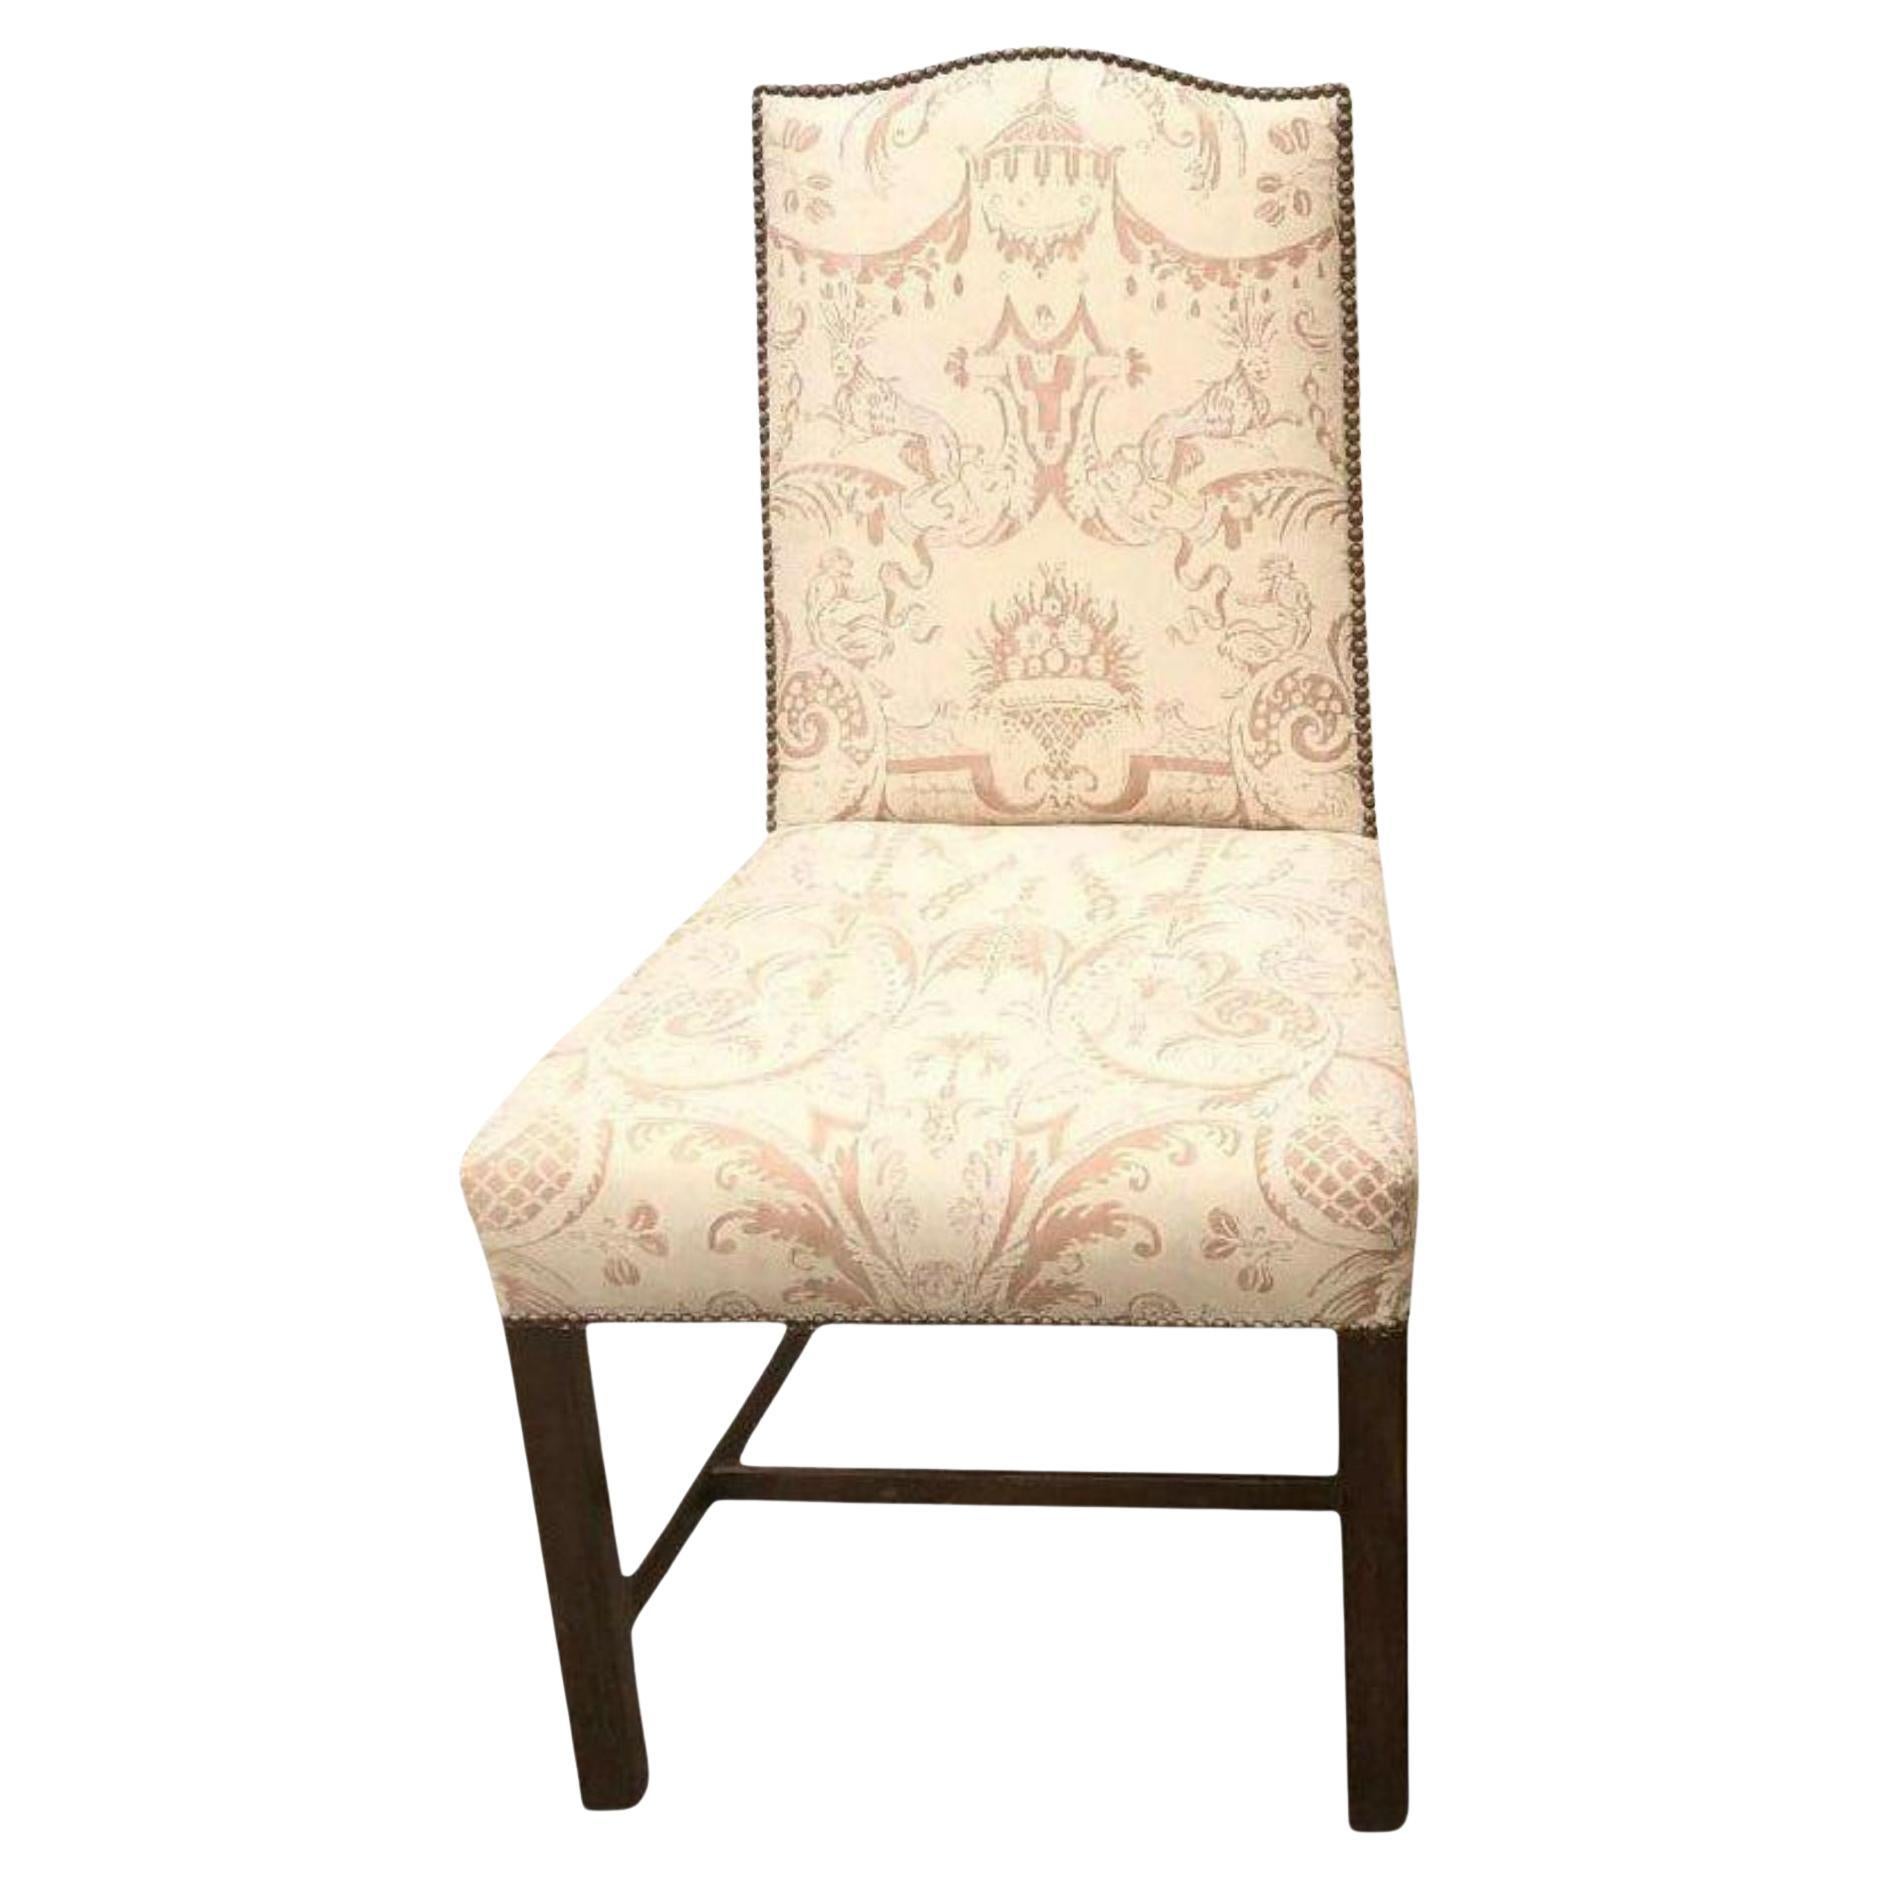 Fortuny Upholstered Antique Chinese Chippendale Designer Chair For Sale